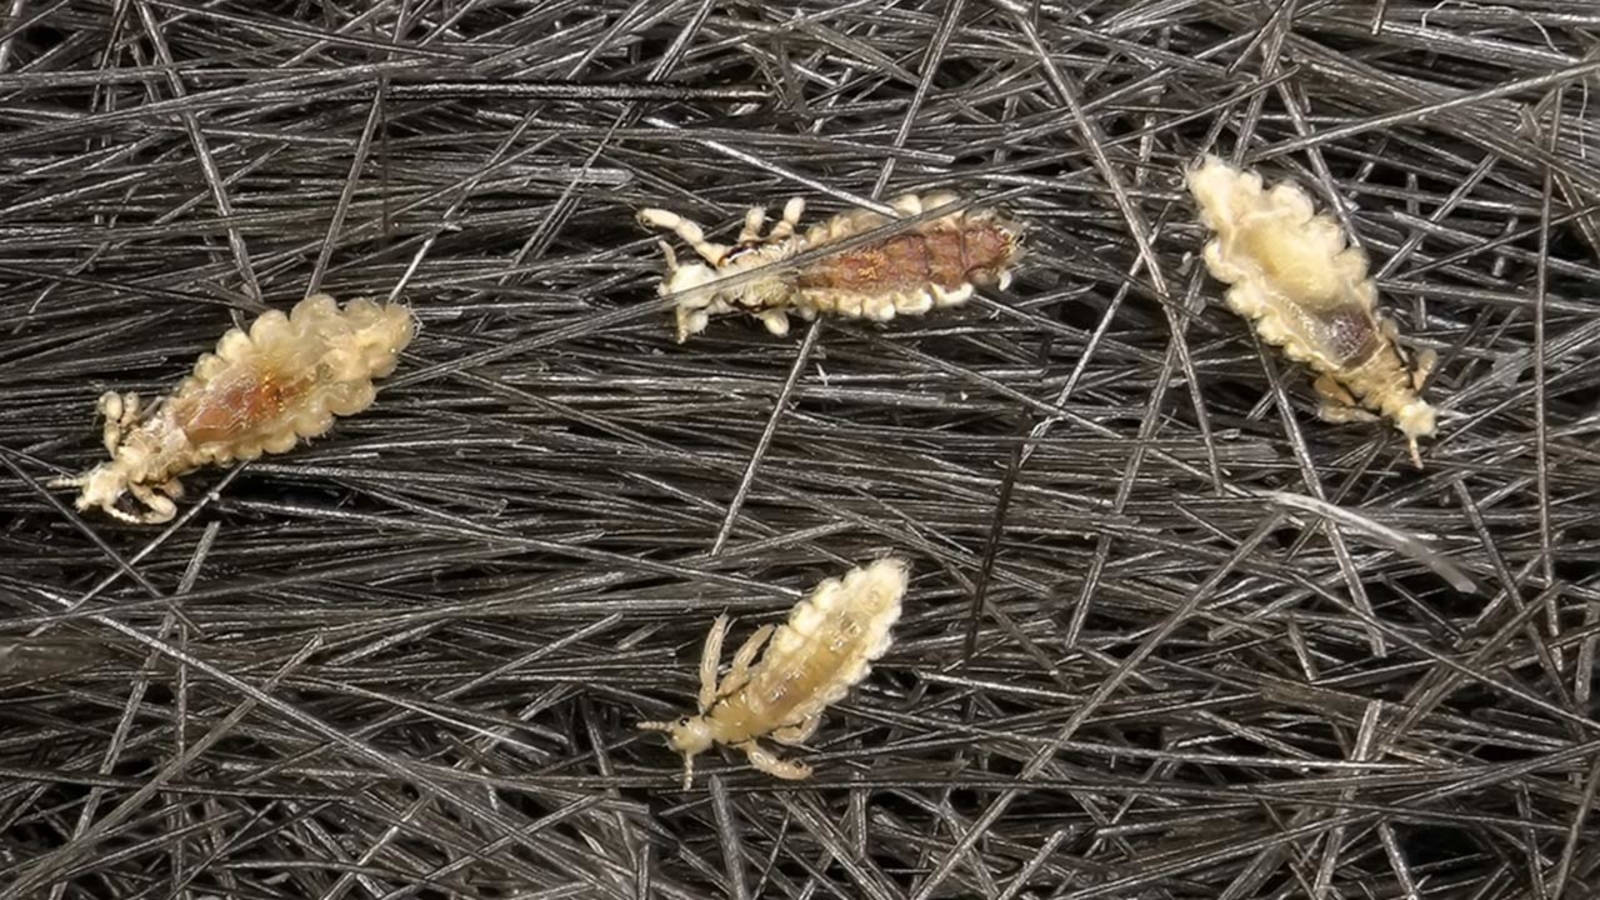 Microscopic View of a Body Louse on Haystack Wallpaper